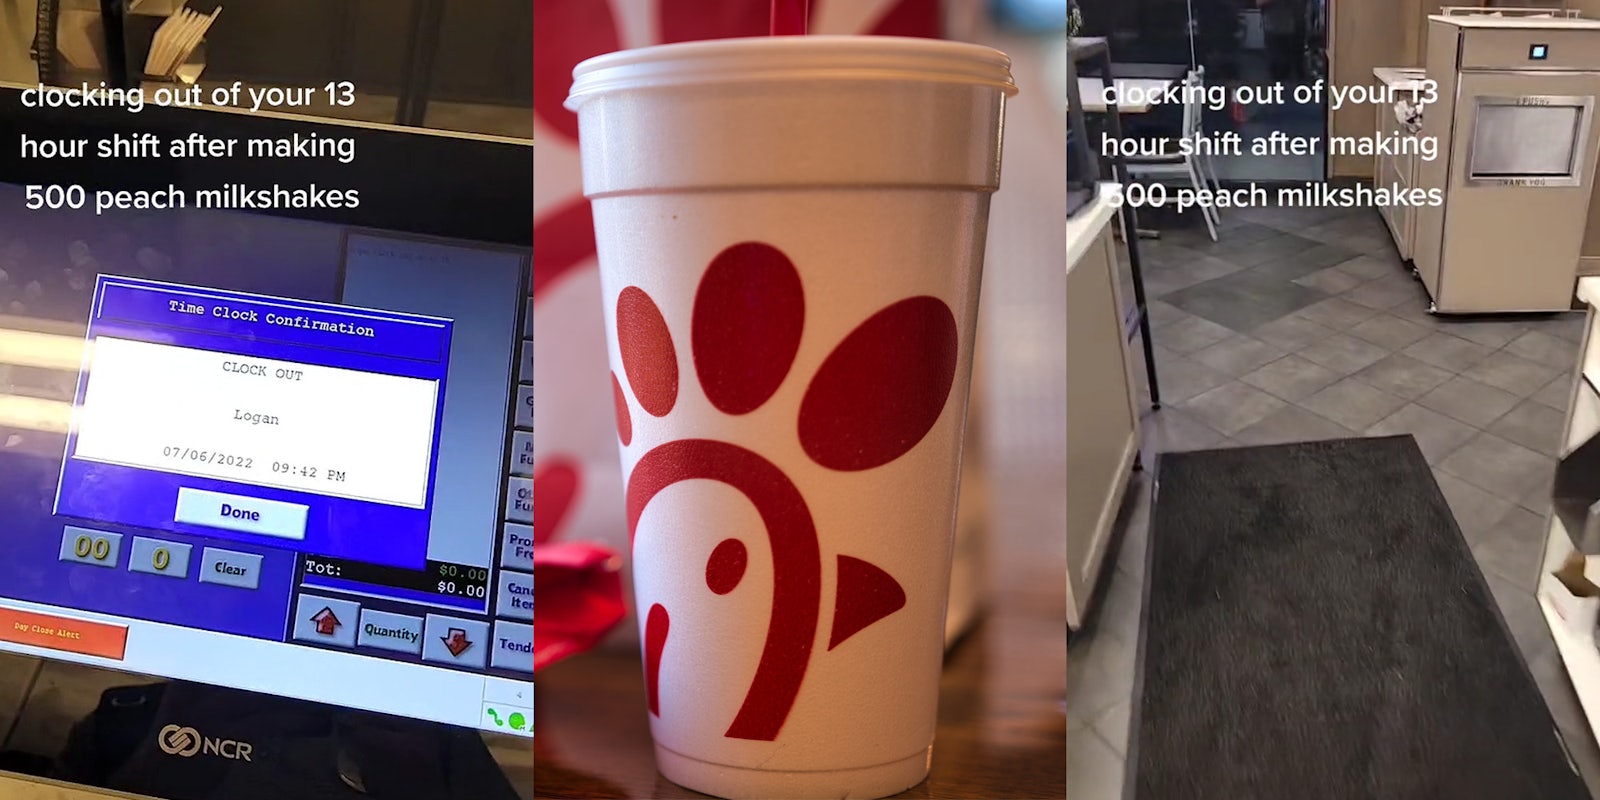 Chick-fil-a worker clock out on computer screen caption 'clocking out of your 13 hour shift after making 500 peach milkshakes' (l) Chick-fil-a cup with logo (c) Chick-fil-a worker exiting restaurant caption 'clocking out of your 13 hour shift after making 500 peach milkshakes' (r)